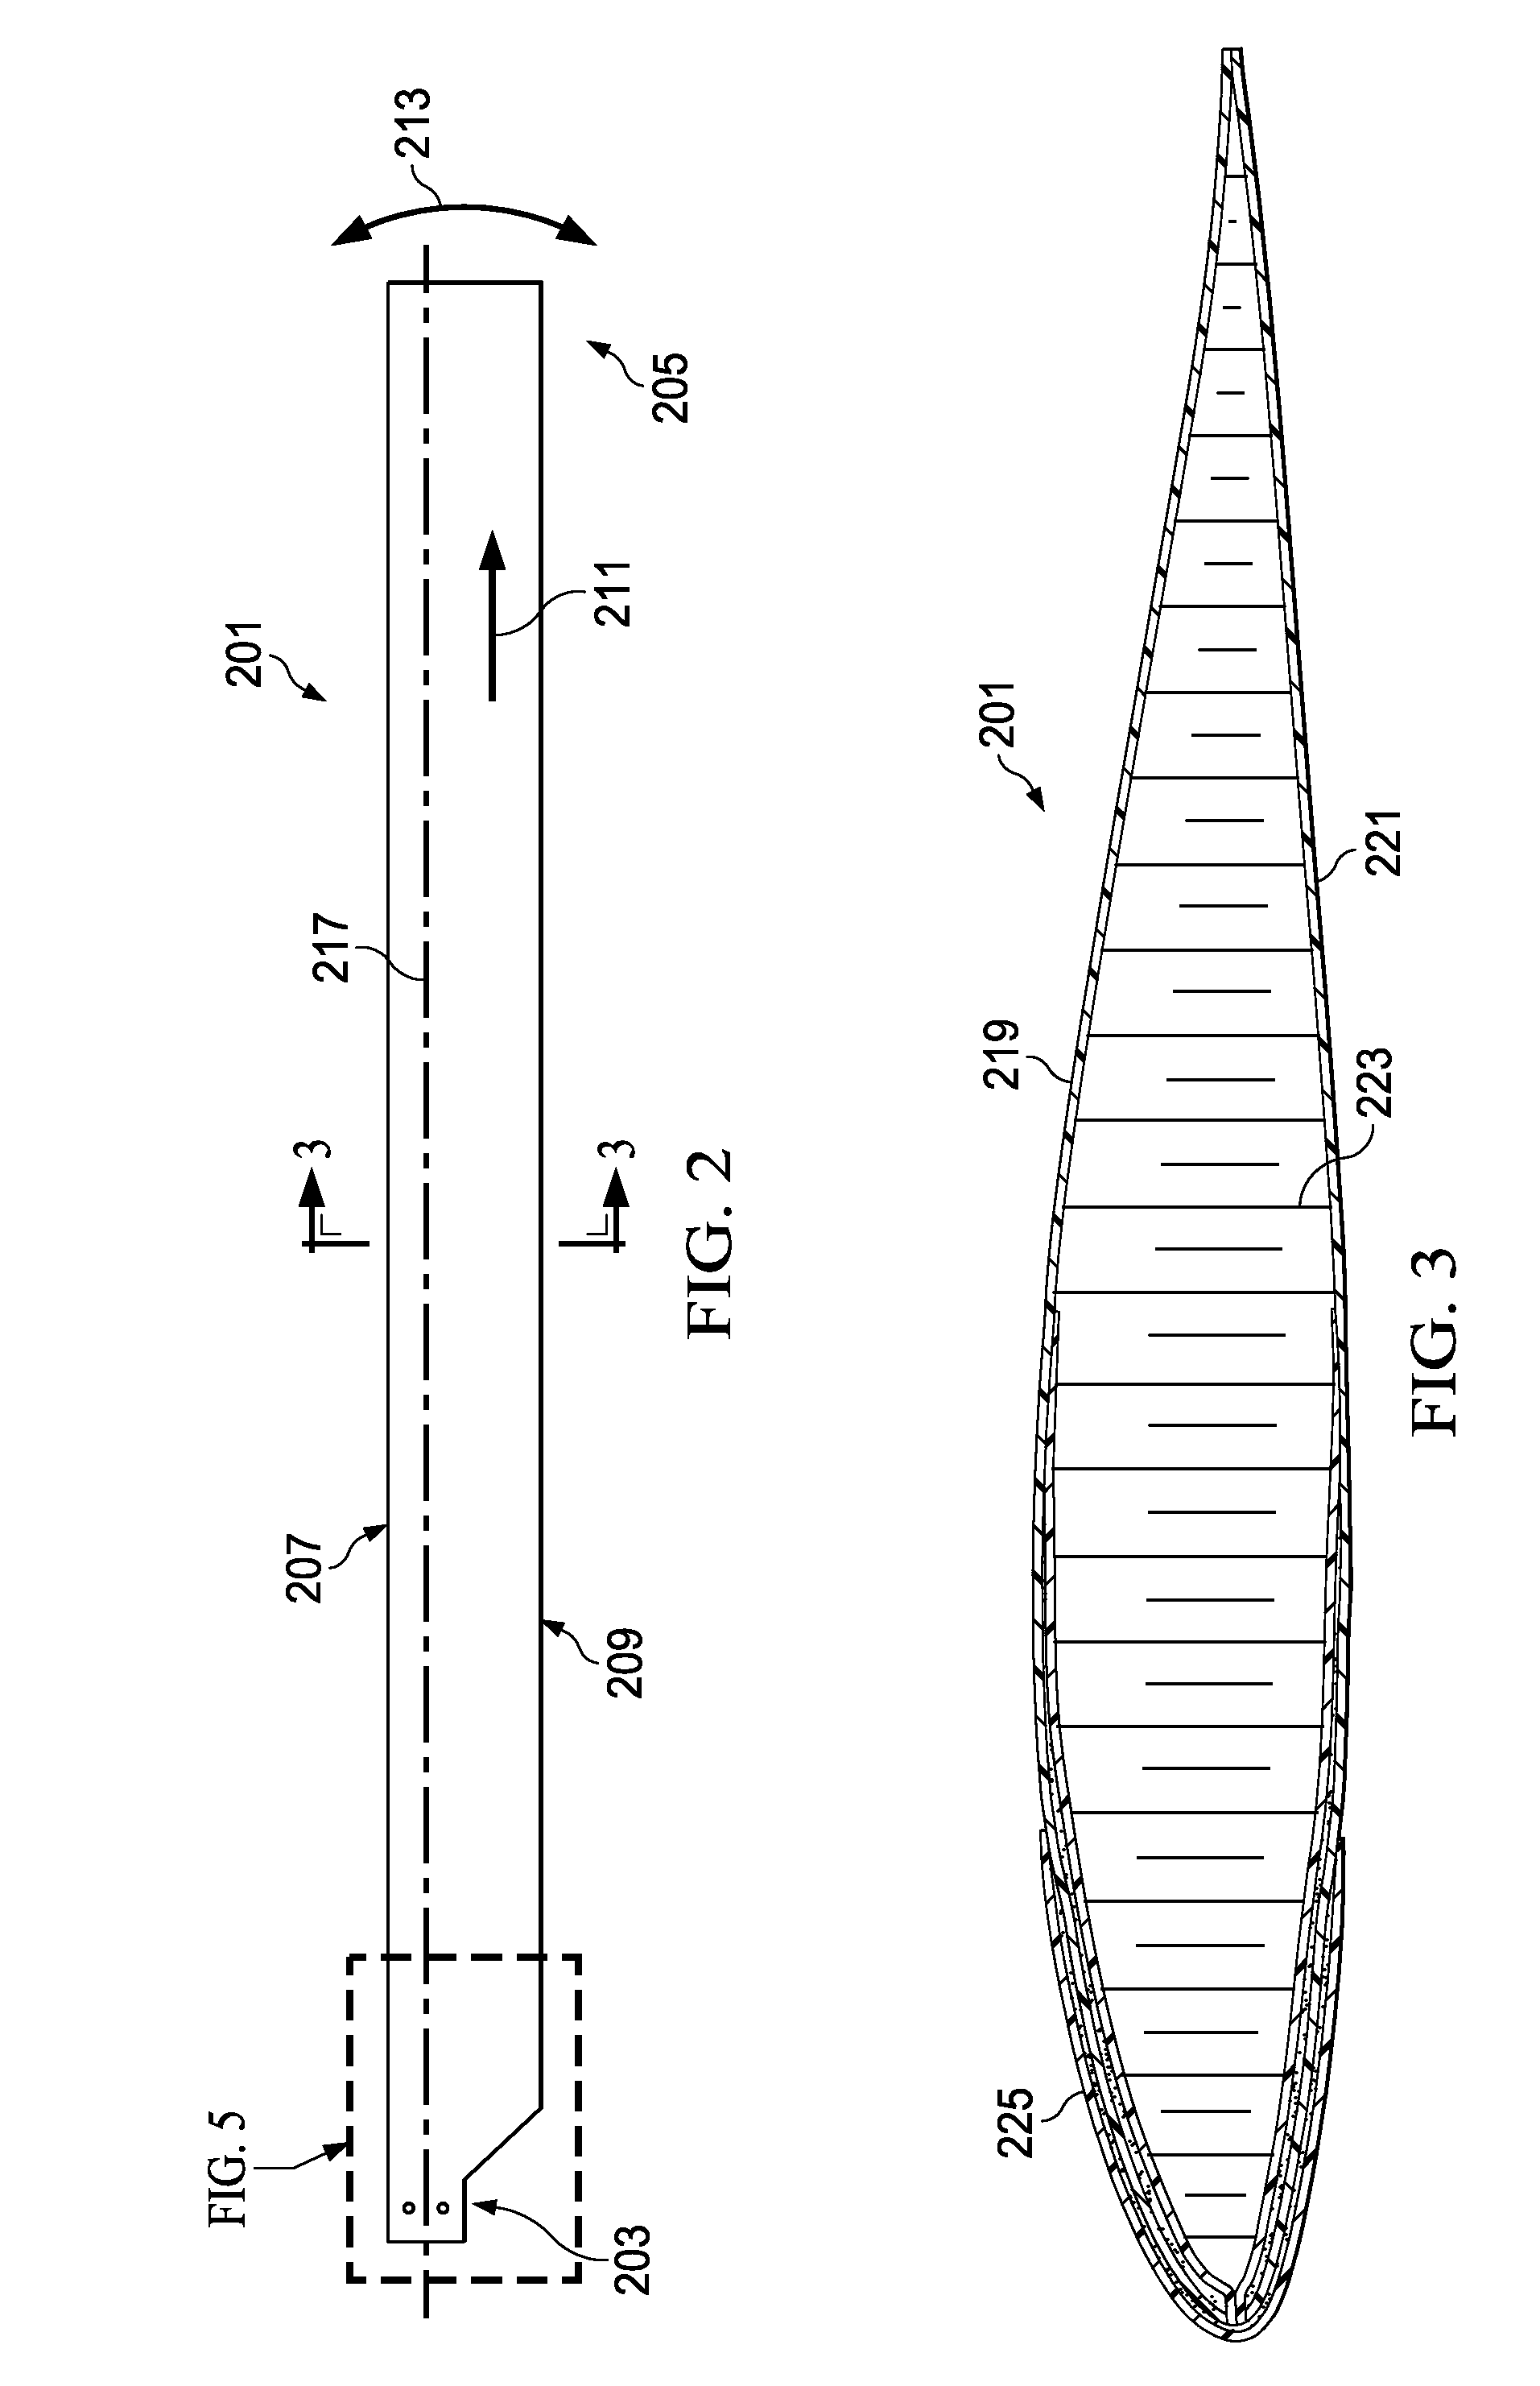 Method of optimizing and customizing rotor blade structural properties by tailoring large cell composite core and a rotor blade incorporating the same